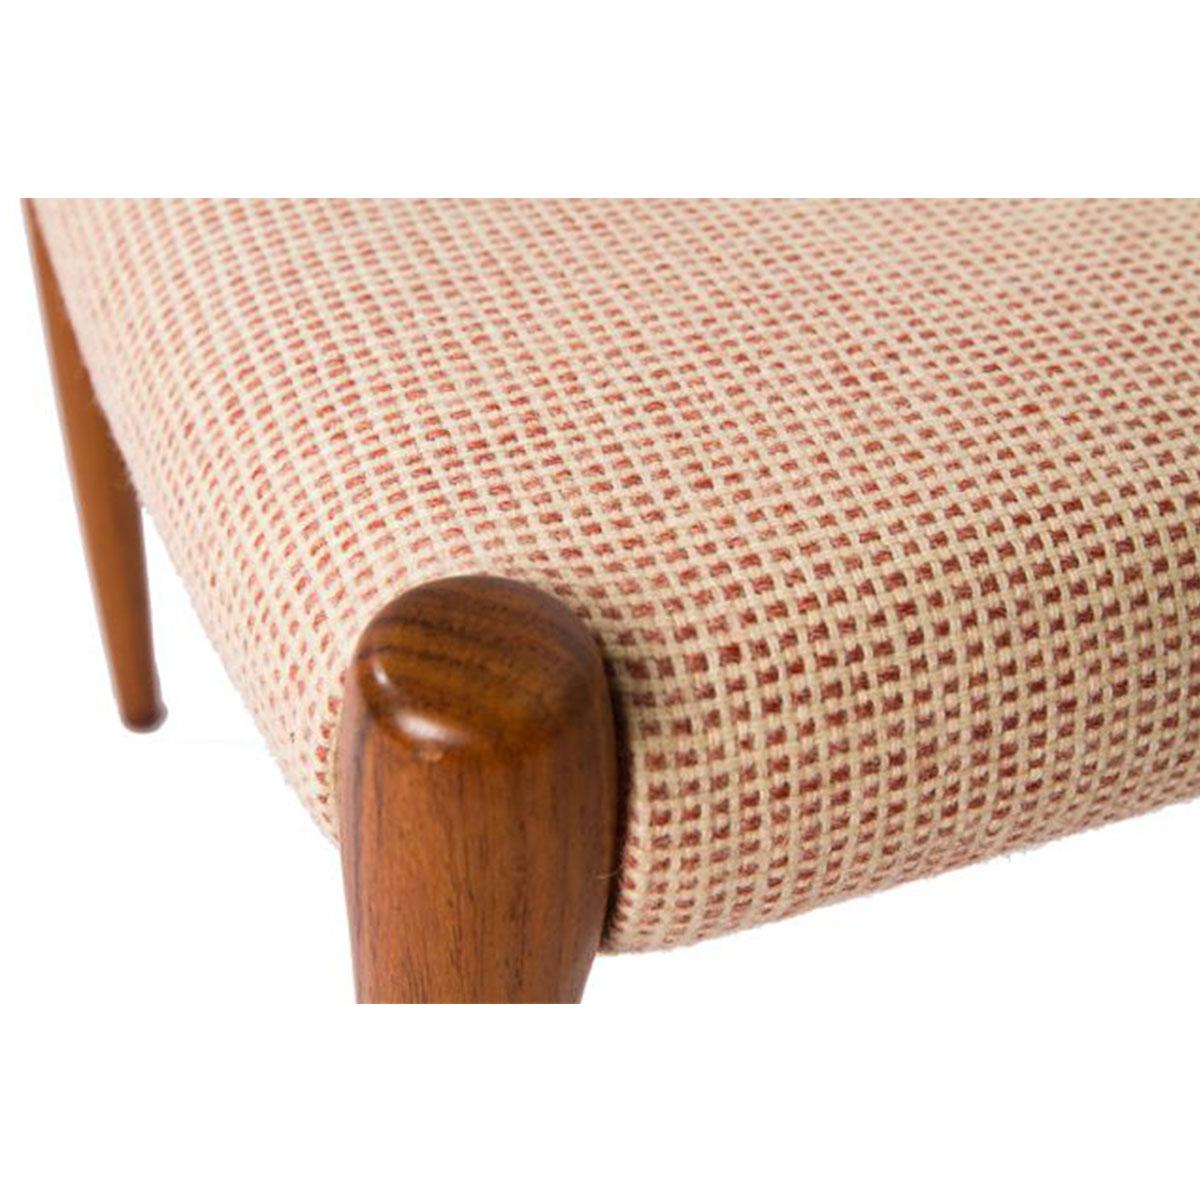 Danish Rosewood Upholstered Ottoman by Niels Moller

Additional information:
Material: Rosewood, Upholstery
Featured at Kensington:
Tall Danish Modern Rosewood (Model 80) ottoman designed by Niels Møller with original upholstery. In near